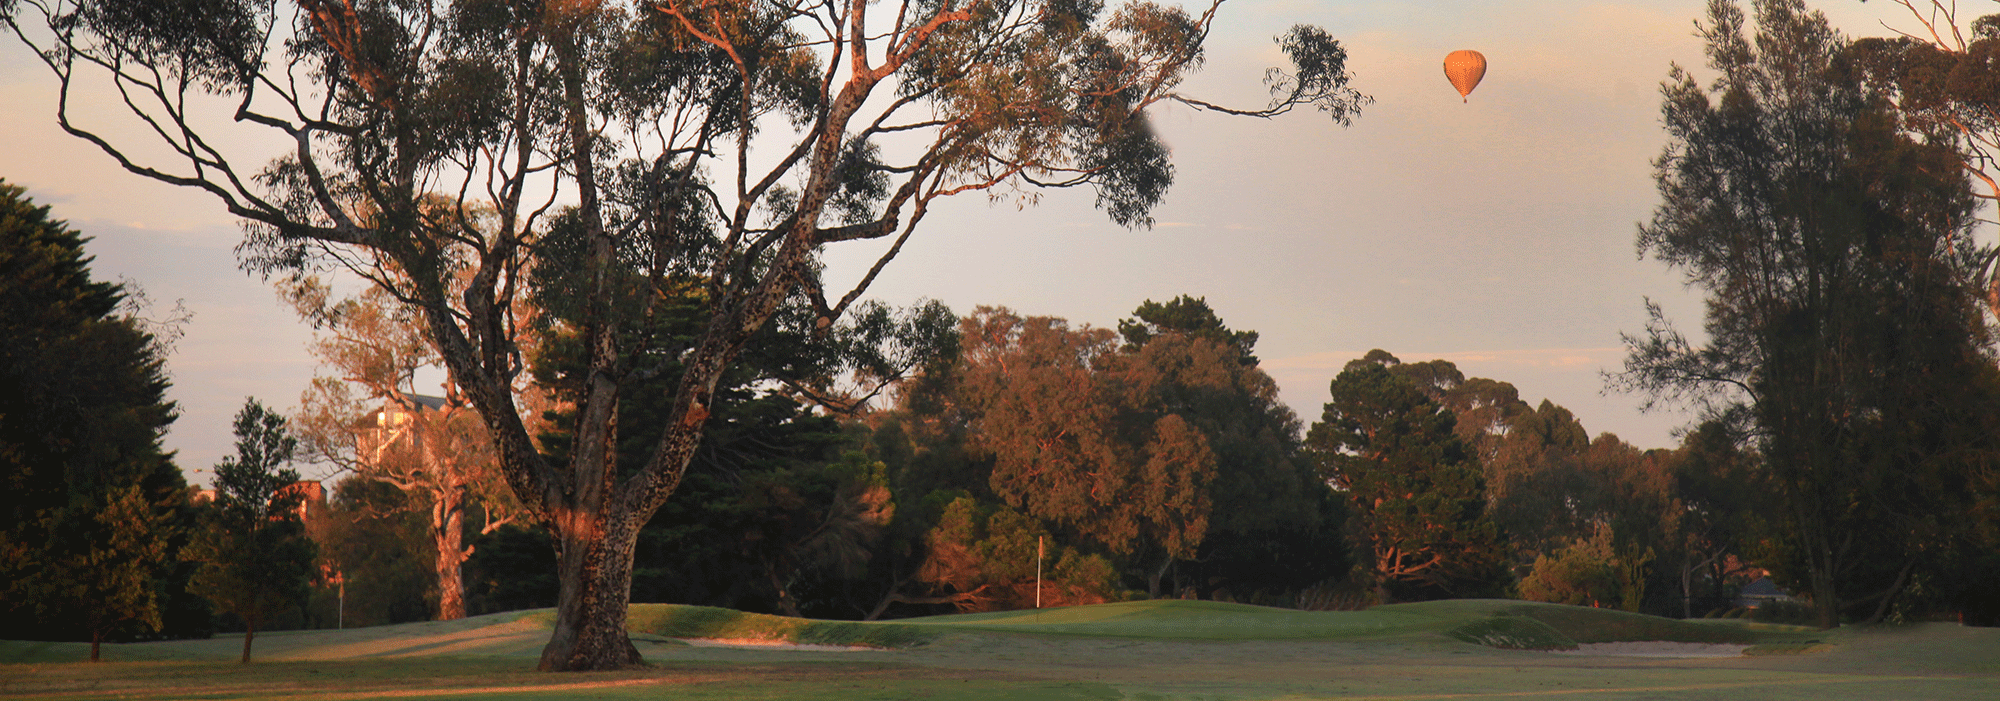 The golf course at sunrise with a hot air balloon in the distance